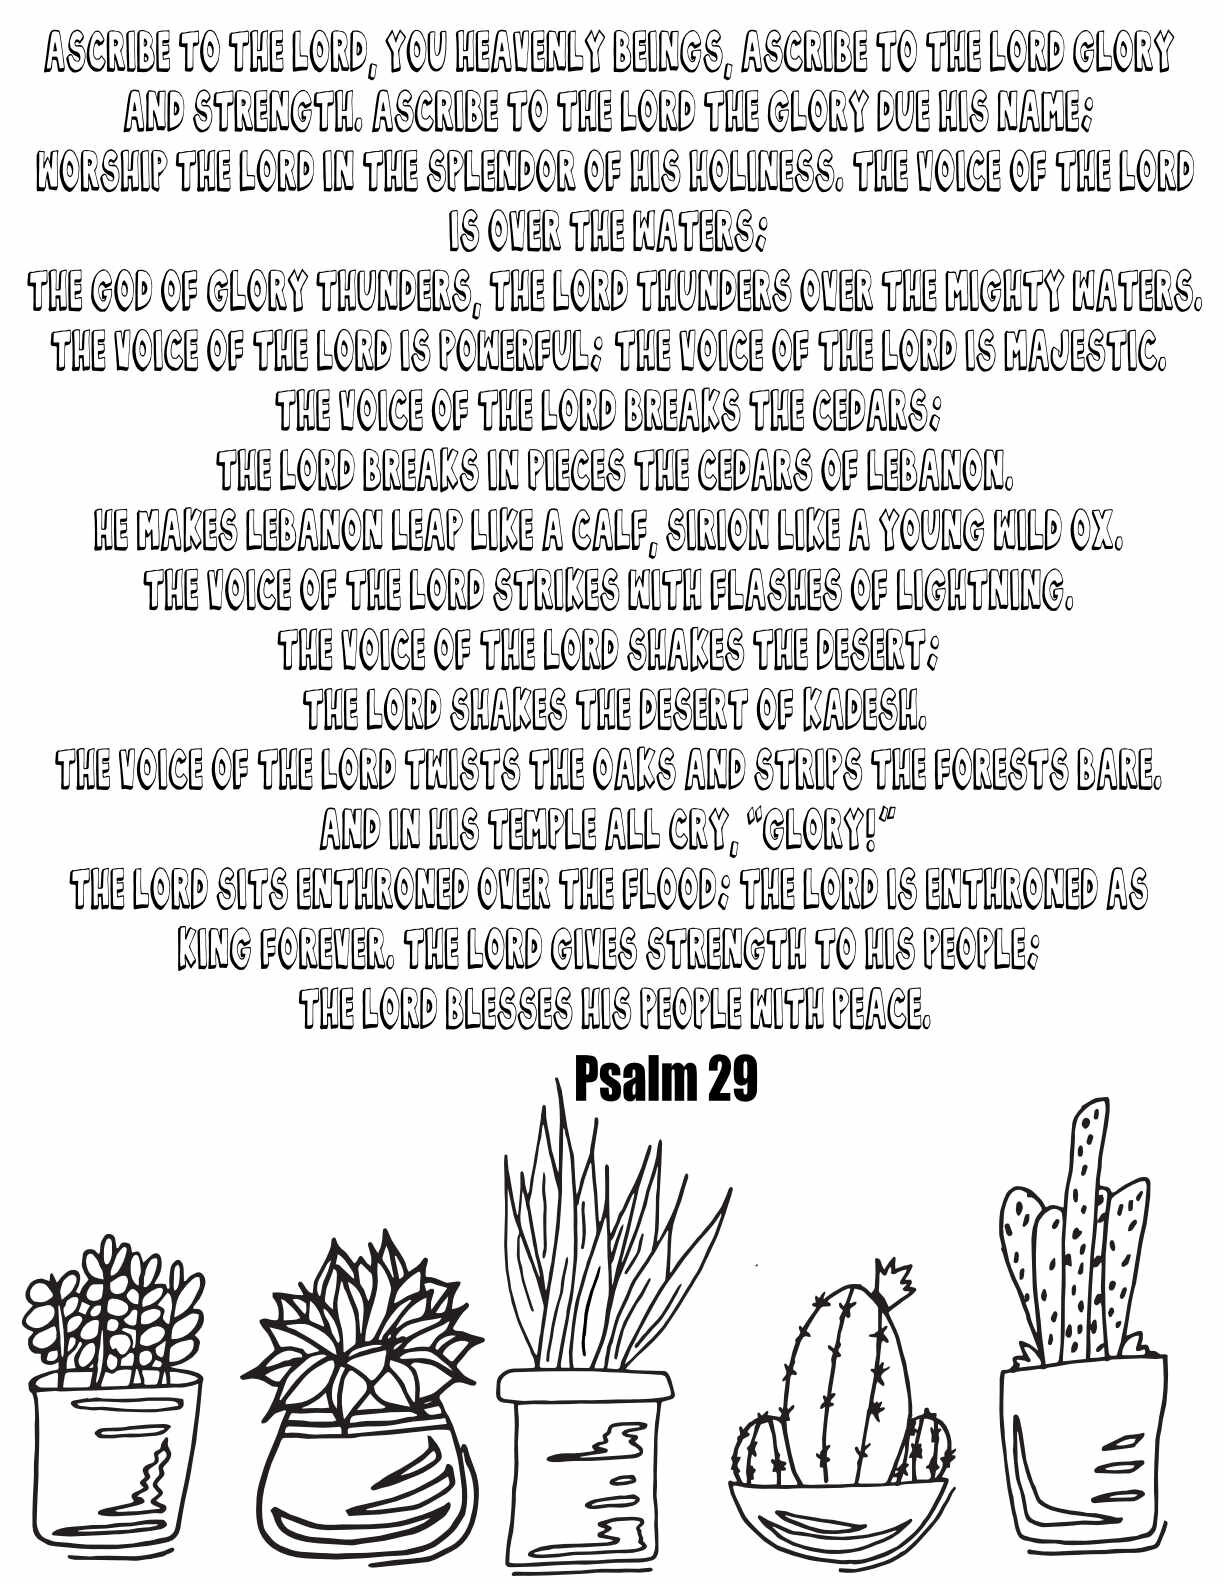 10 Free Printable Psalm Coloring Pages - Download and Color Adult Scripture - Psalm 29CLICK HERE TO DOWNLOAD THIS PAGE FREE